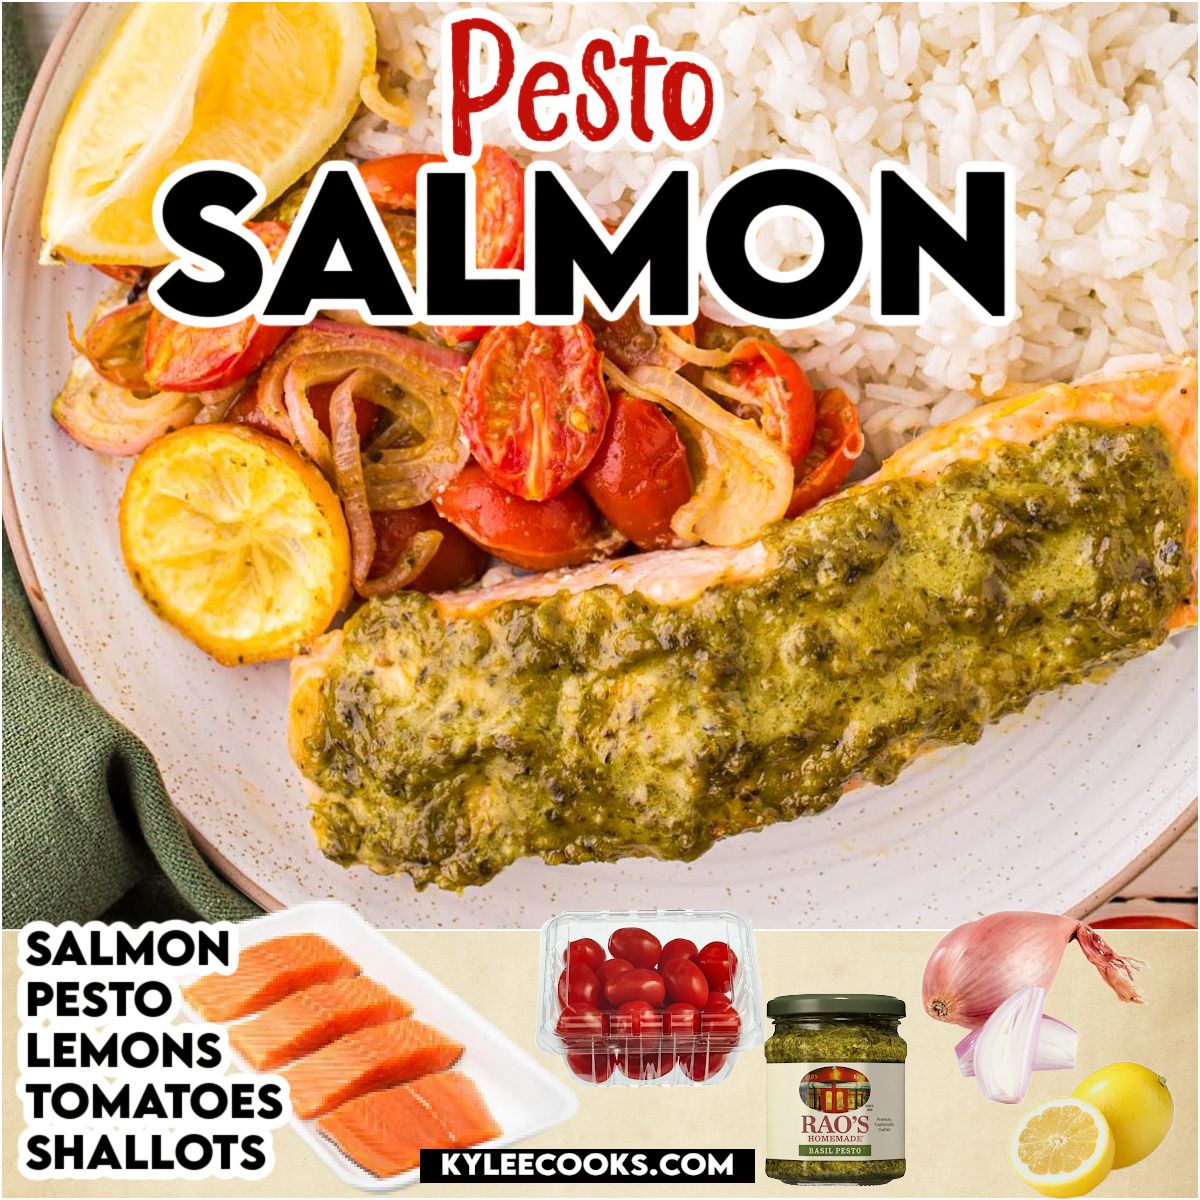 Want an elegant yet easy weeknight dinner? Try this pesto salmon with roasted tomatoes. Simply delicious! #PestoSalmon #EasyDinnerRecipes #BakedSalmon #kyleecooks kyleecooks.com/pesto-salmon/